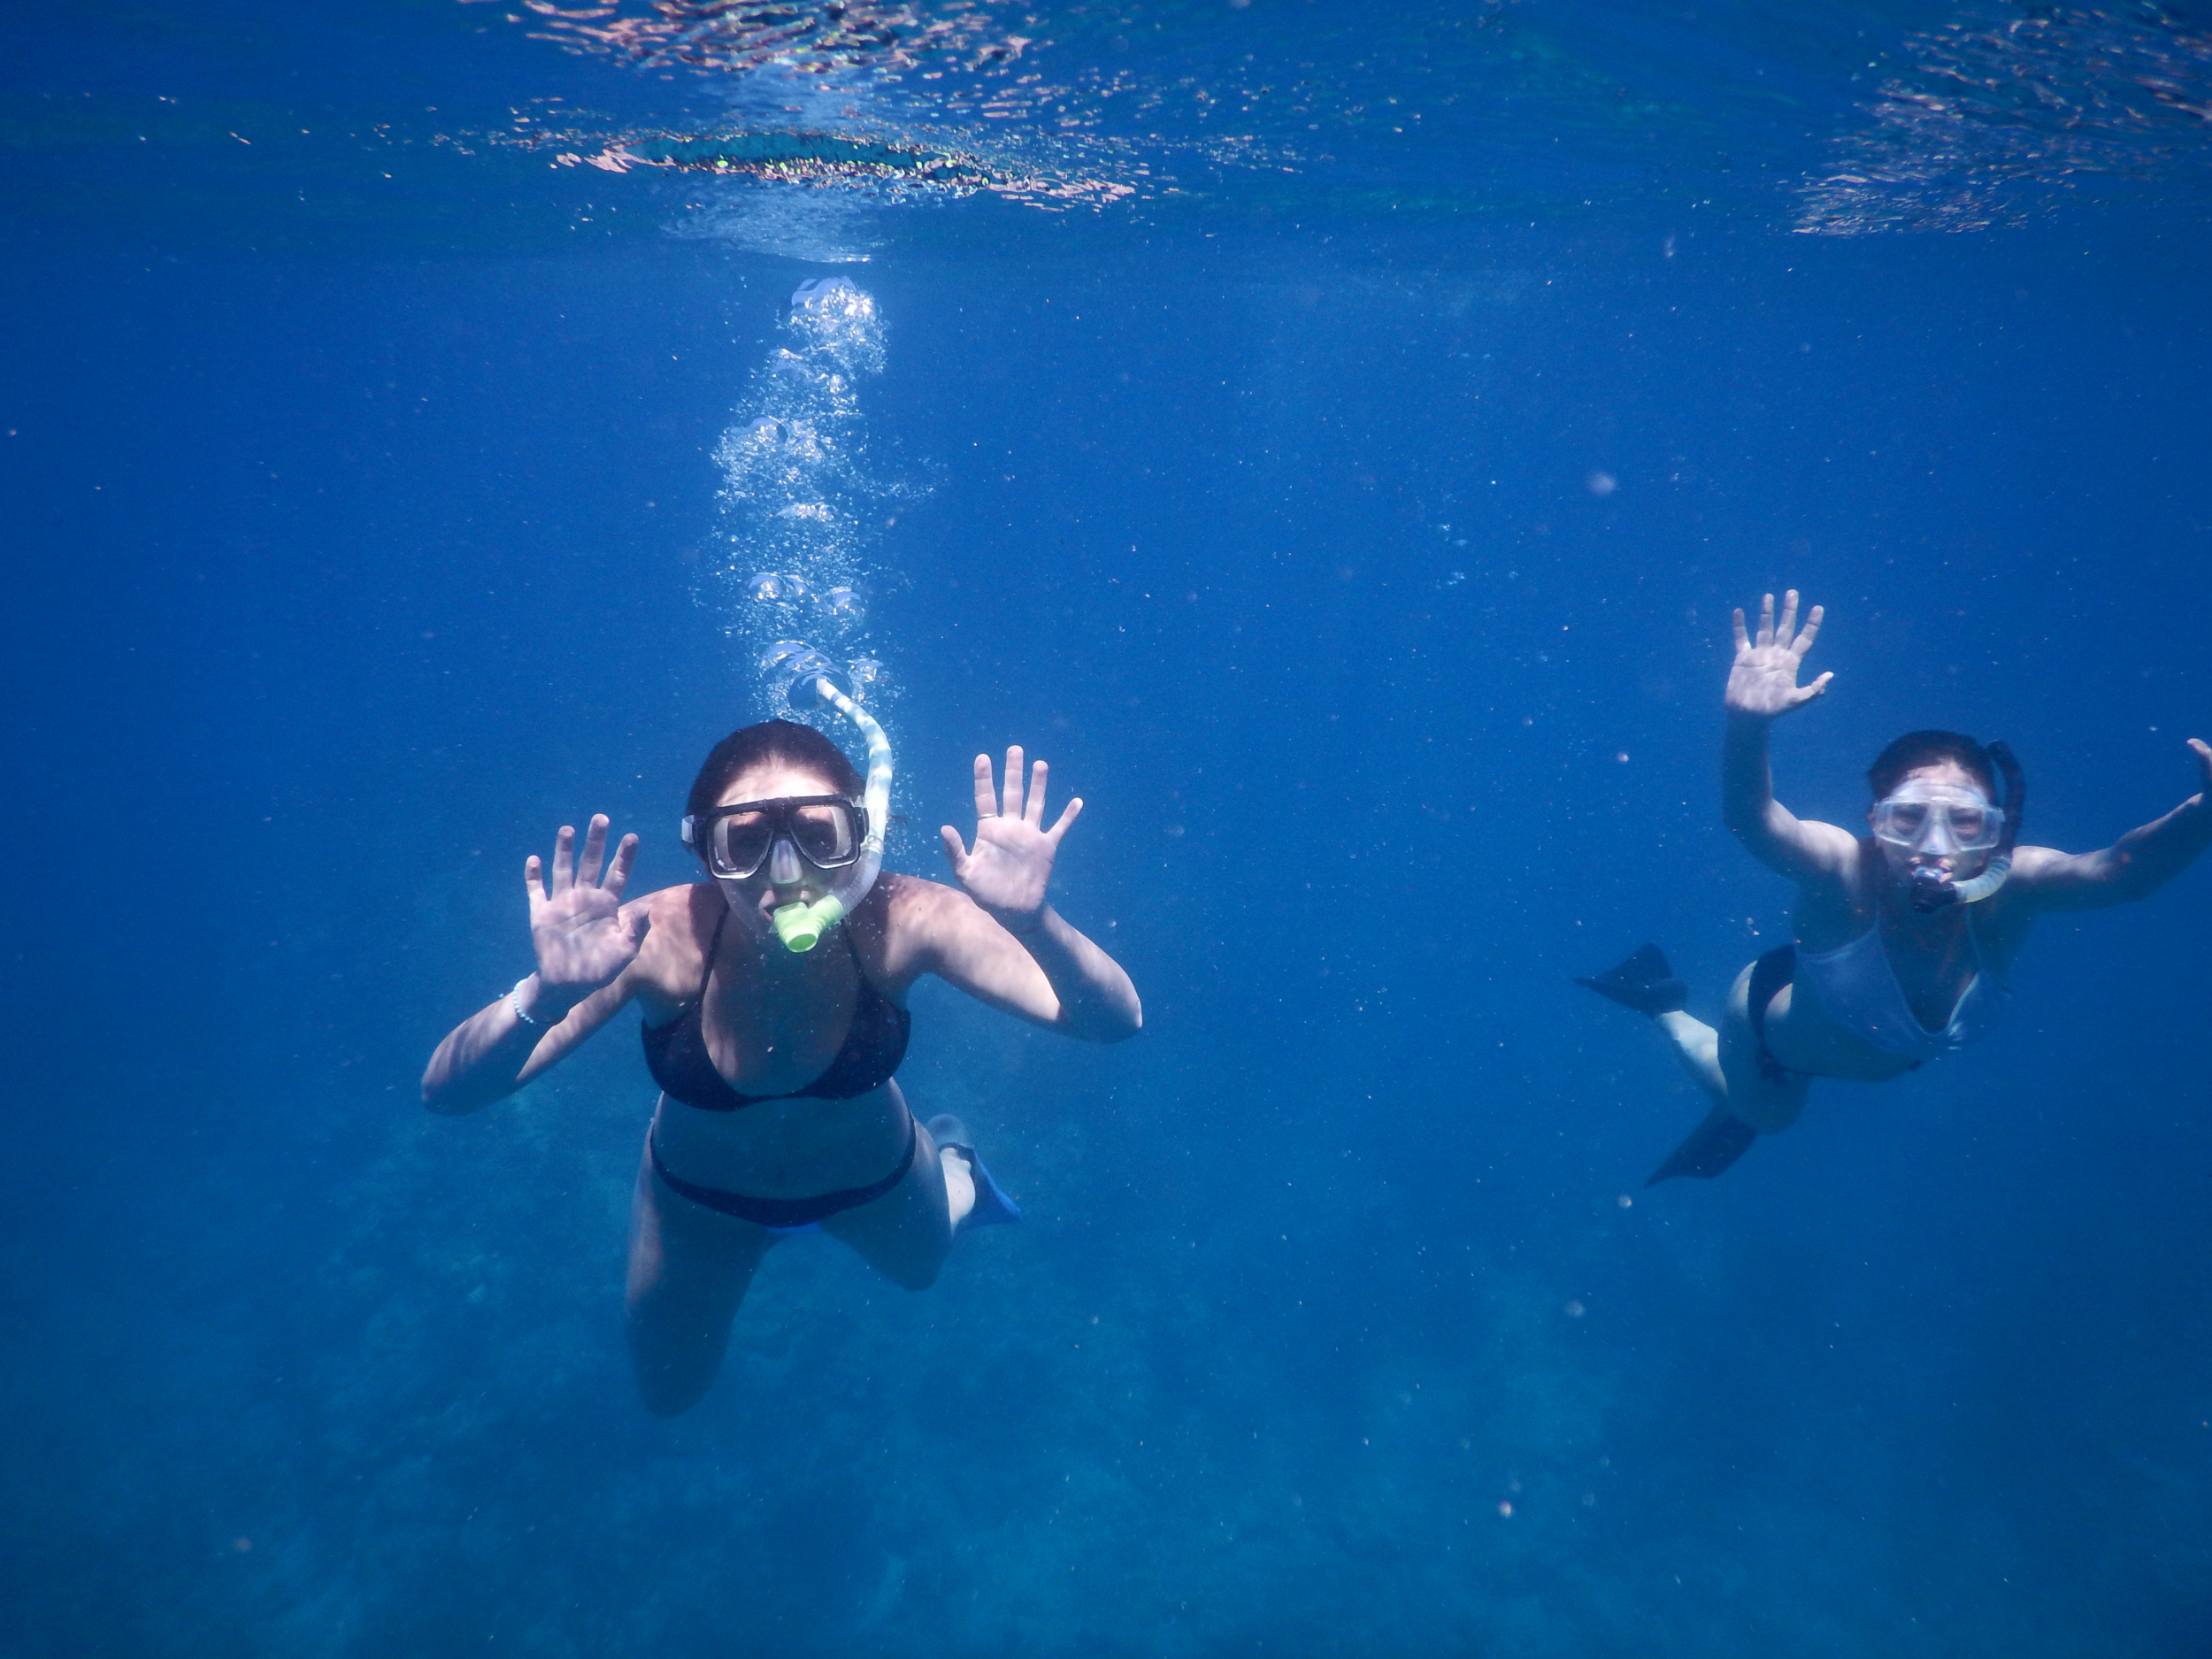 47. Underwater waves, Cindy and Helena